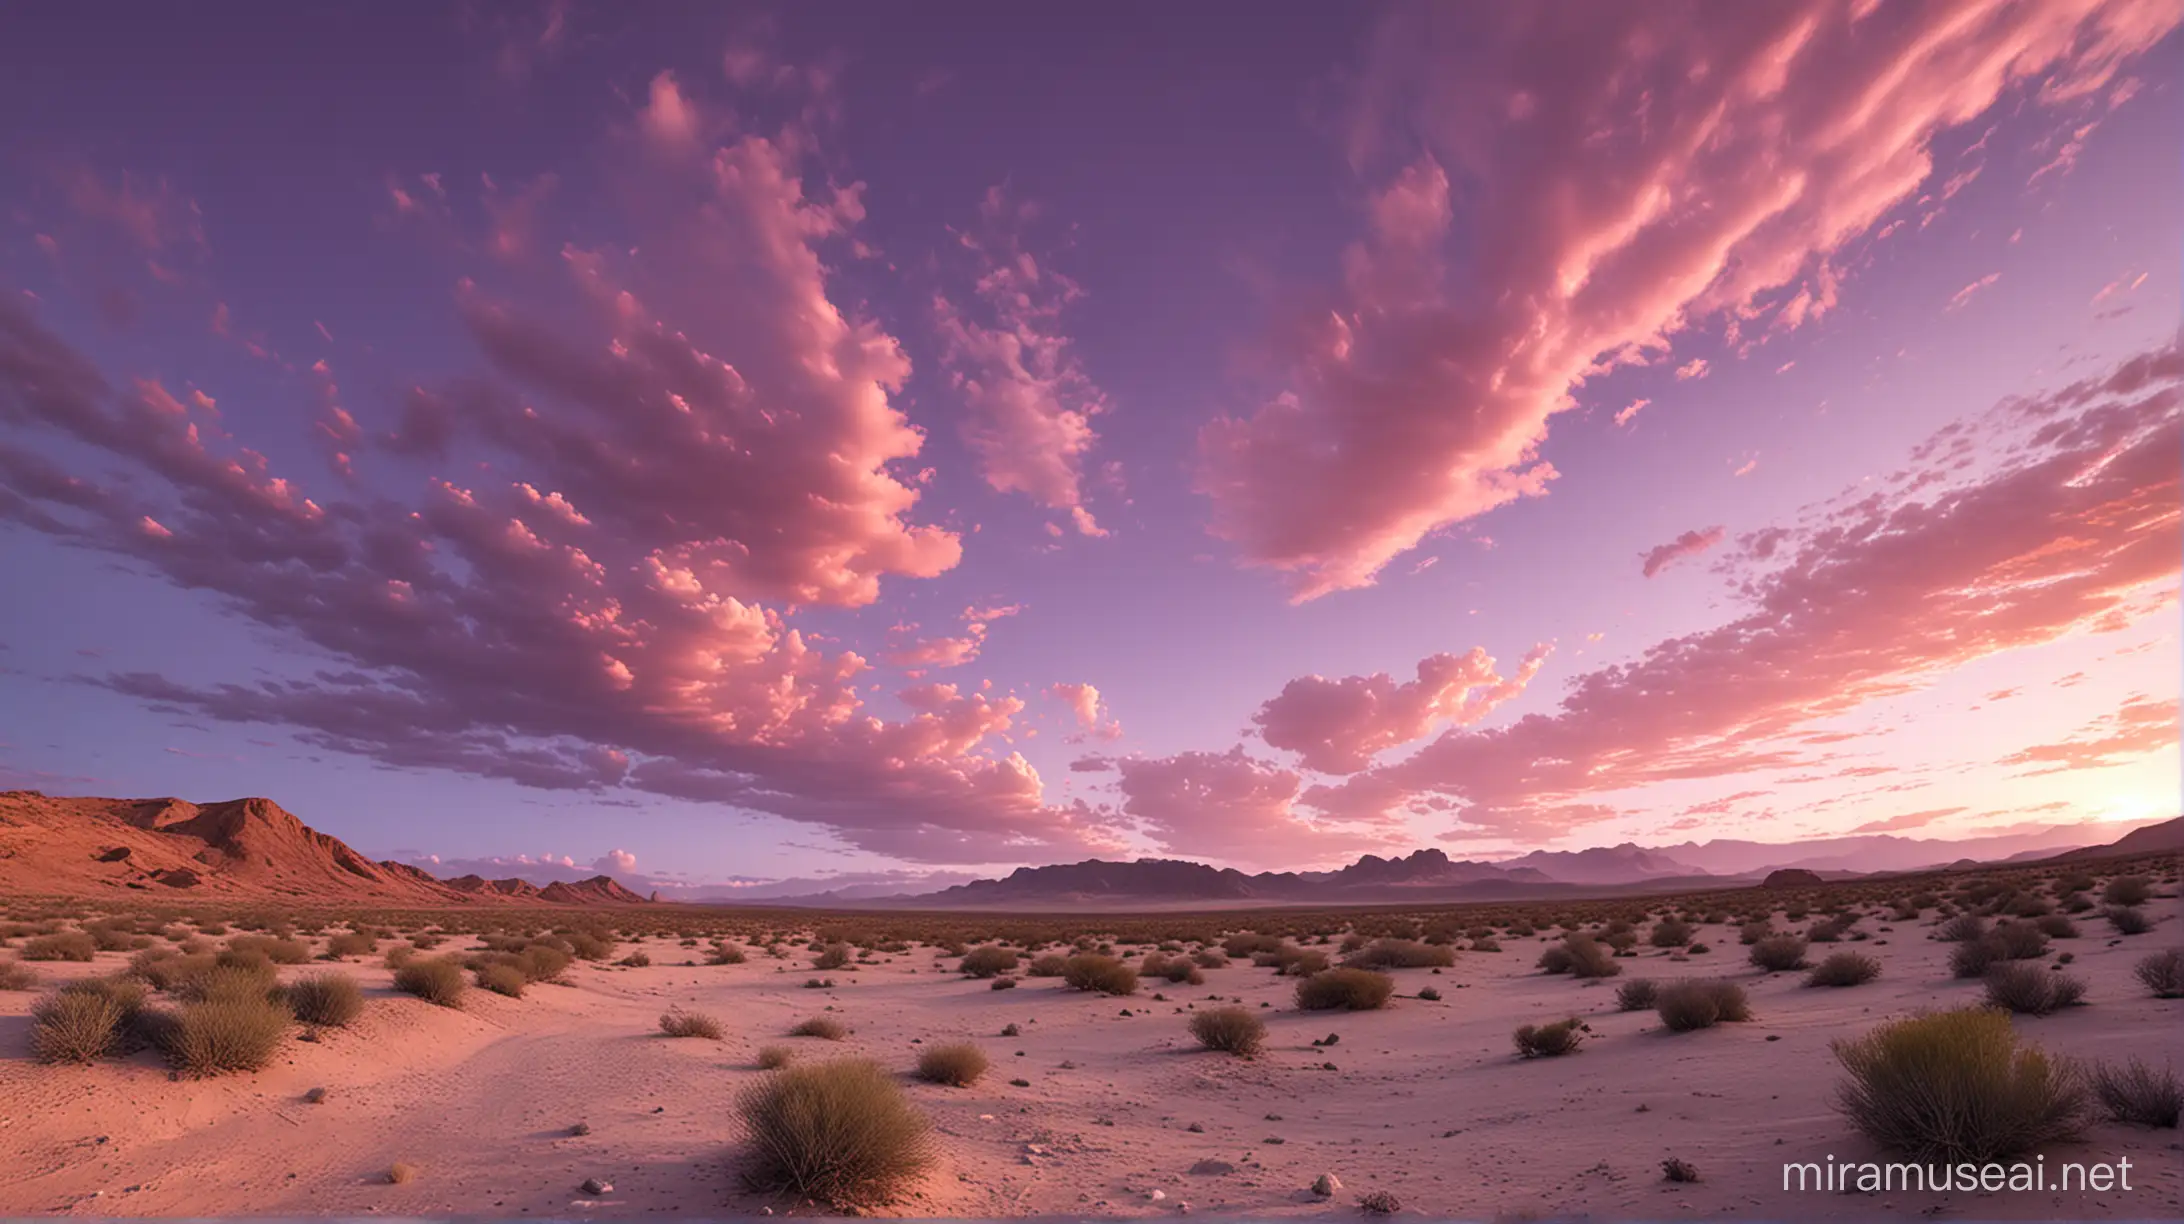 HDRI rendering of desert with pink and violet sky, clouds, and environment.